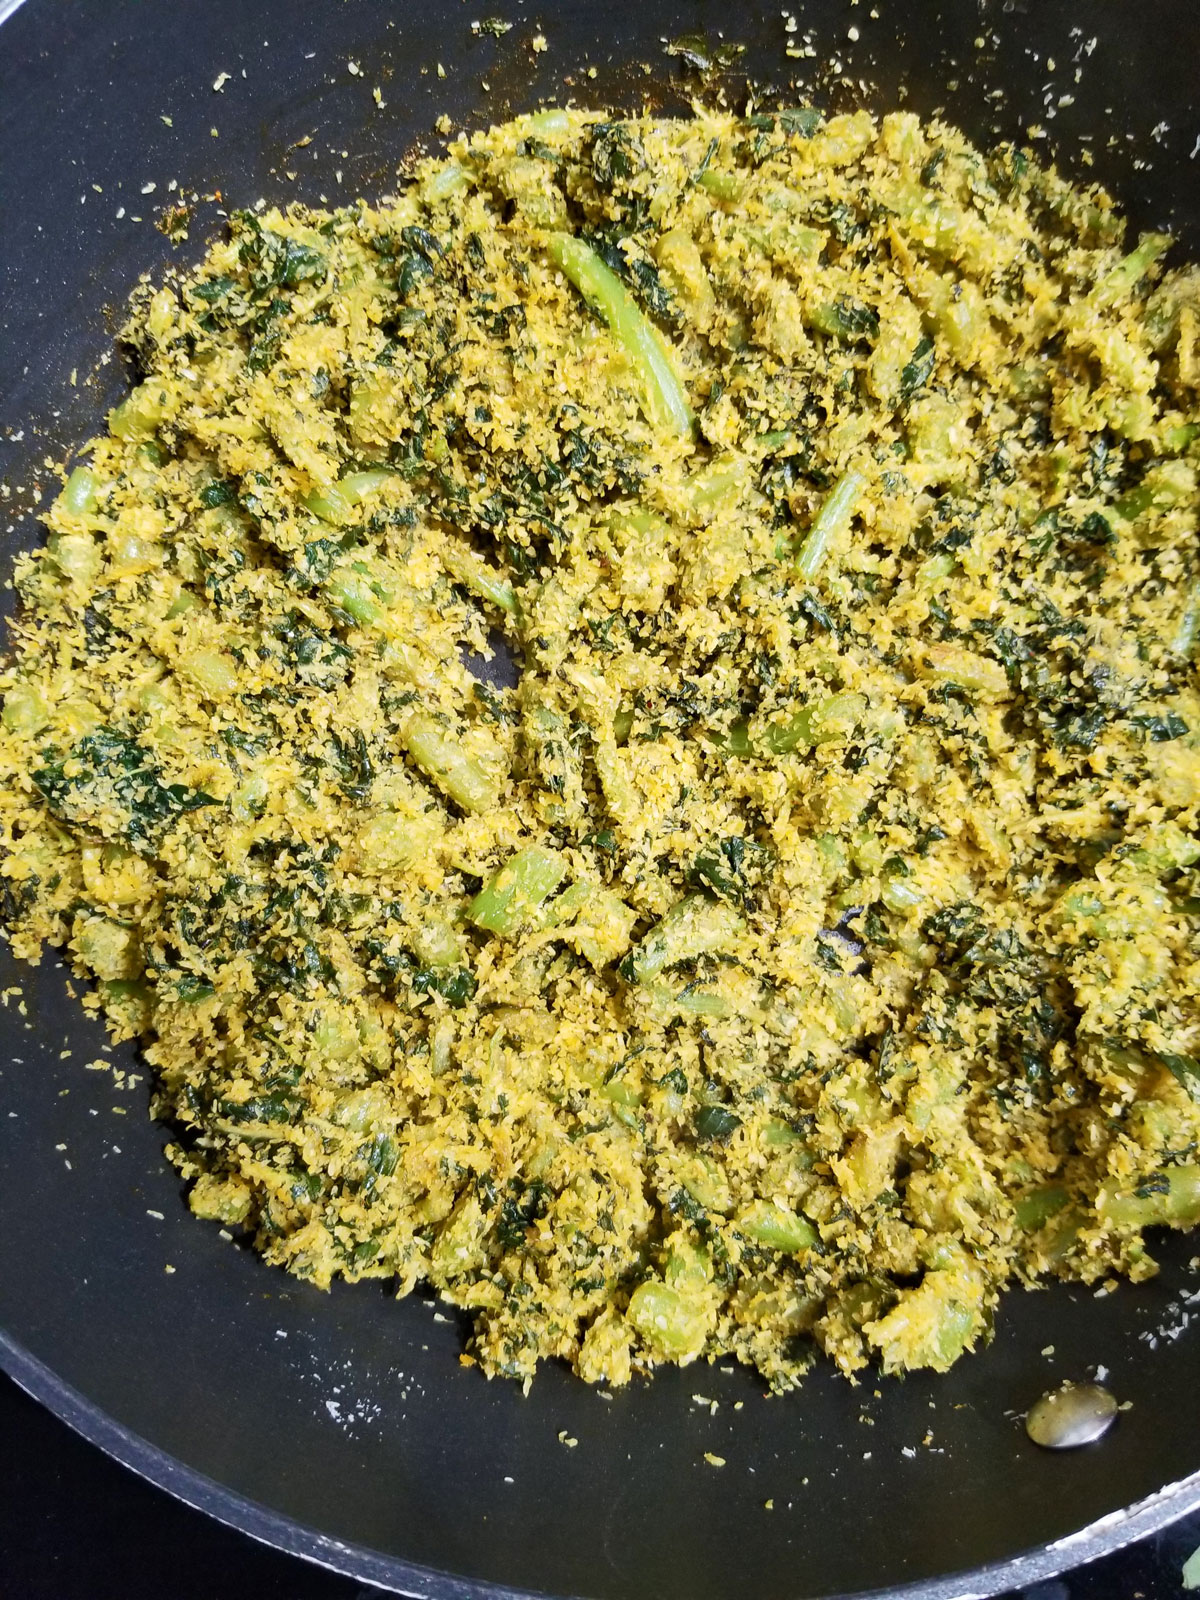 amaranth leaves stir fry with coconut and spices